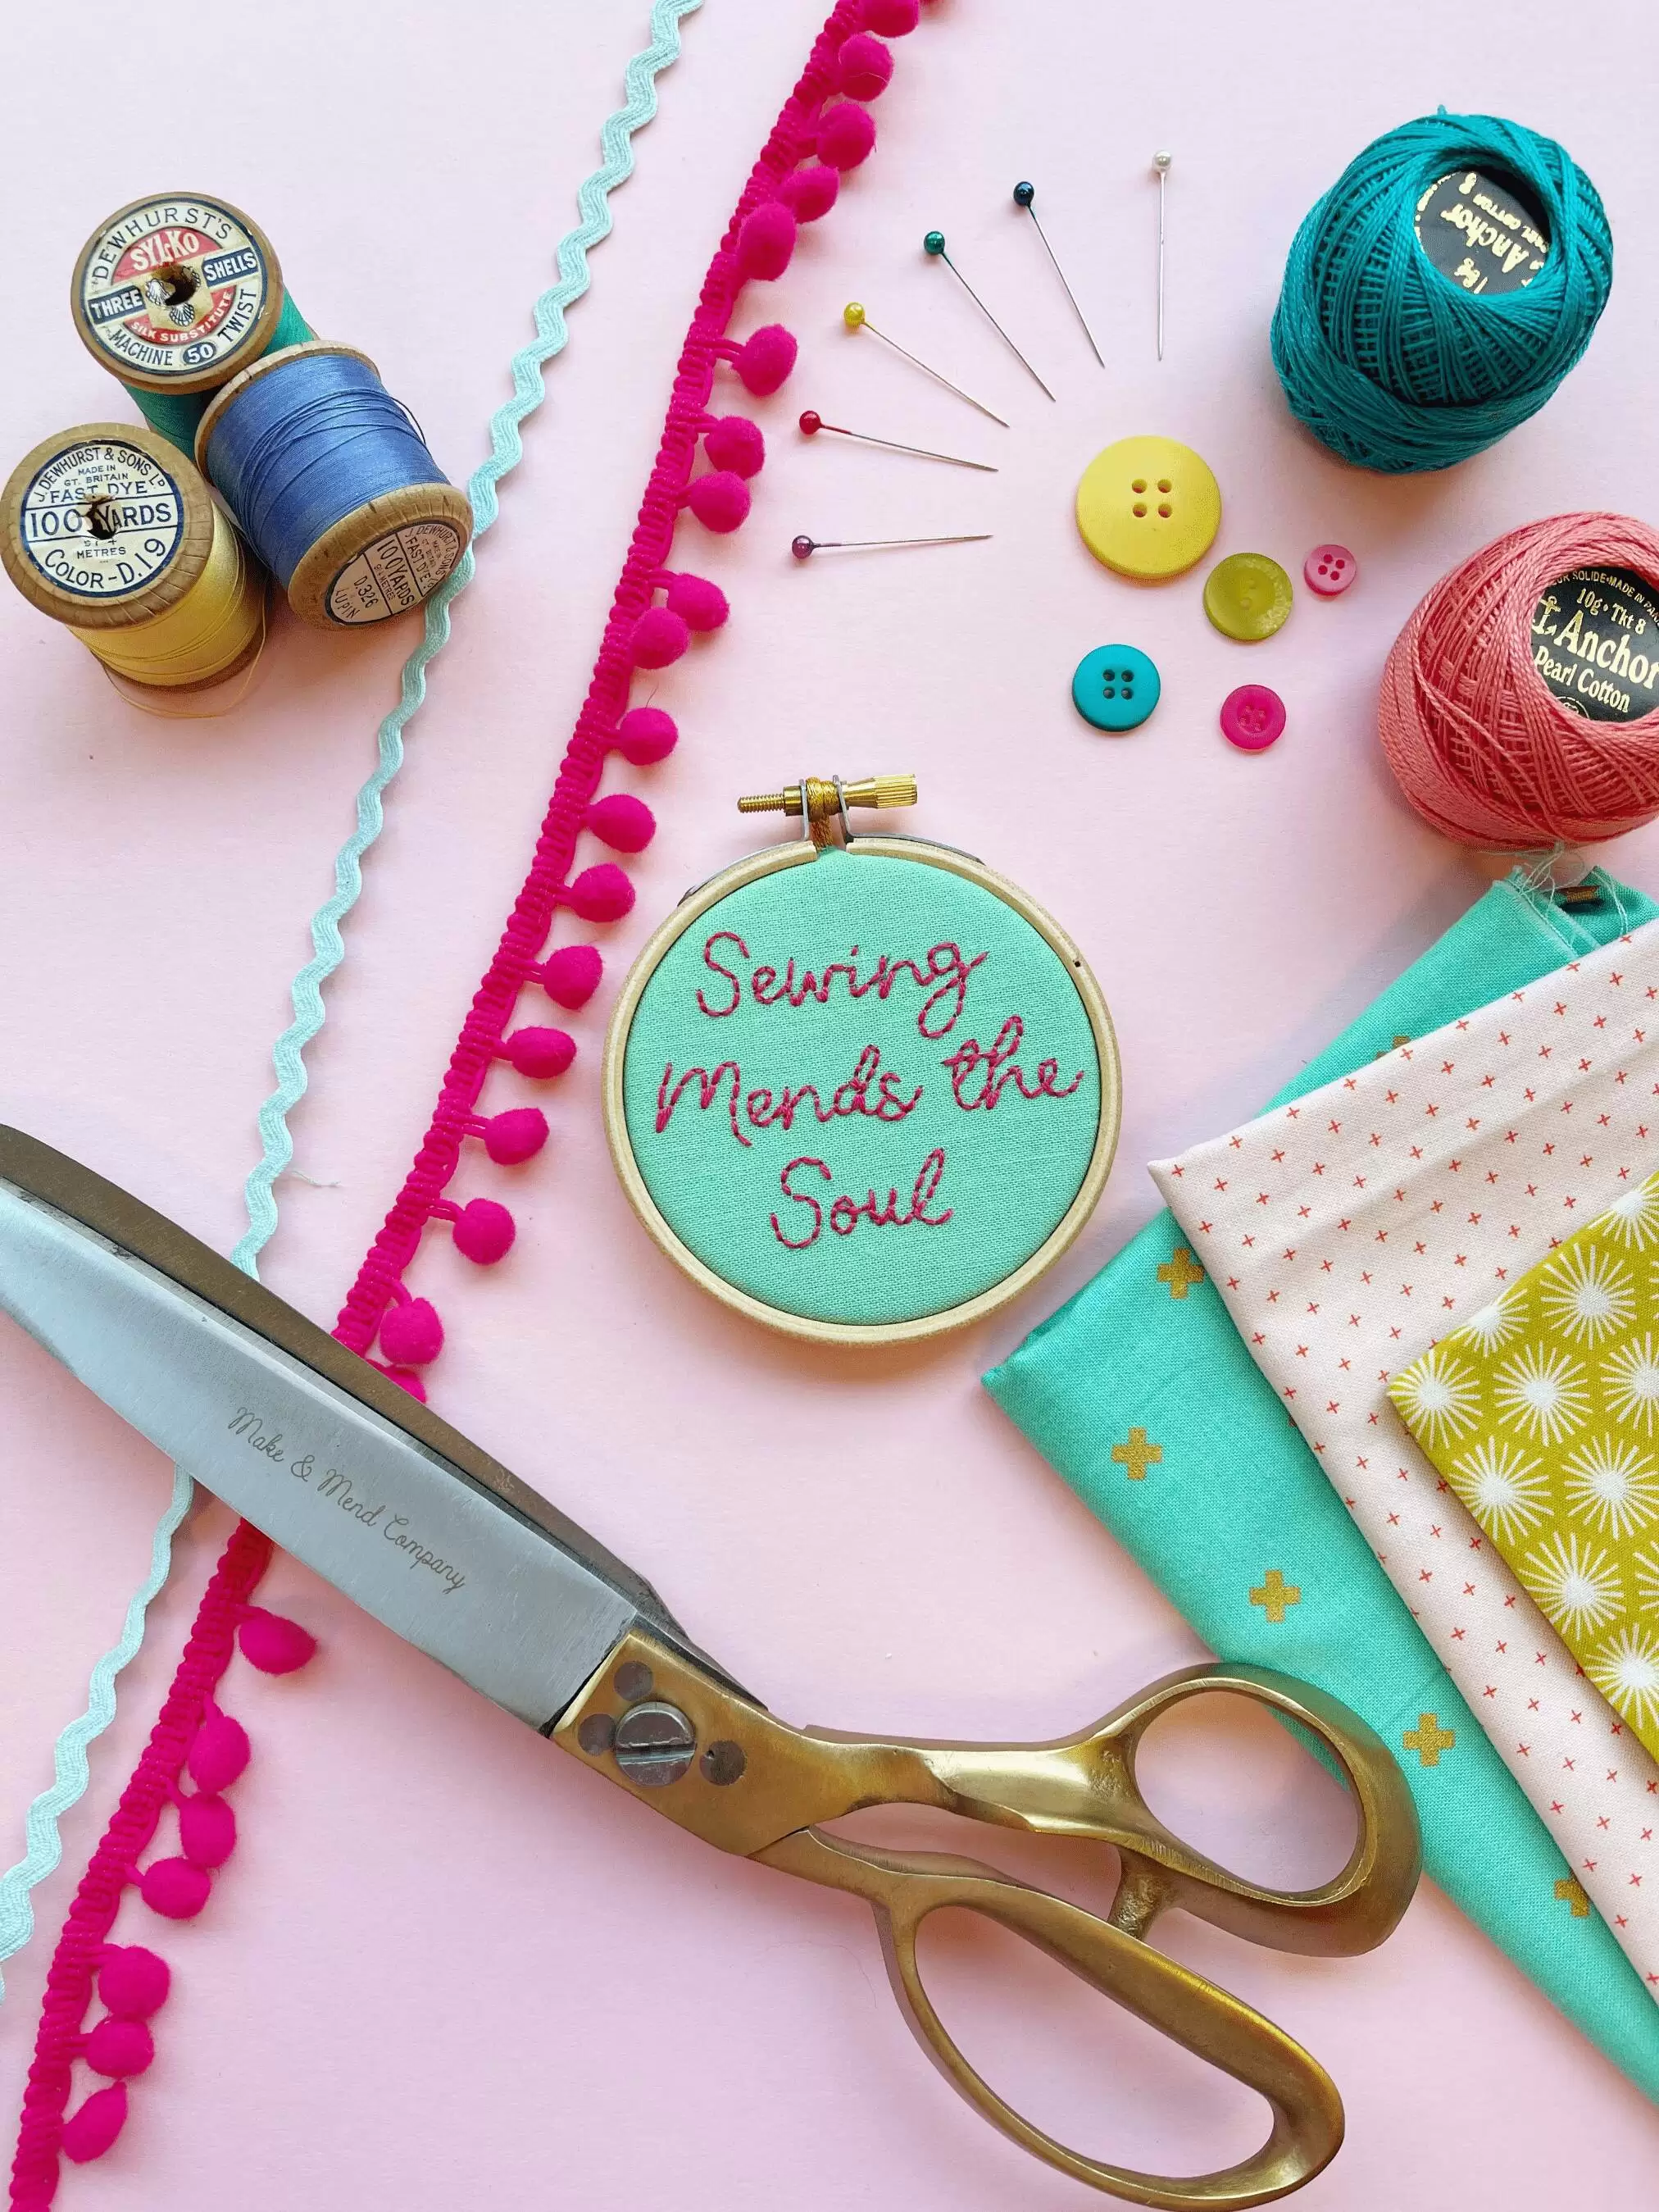 What Embroidery Materials do I Need in My Sewing Kit?